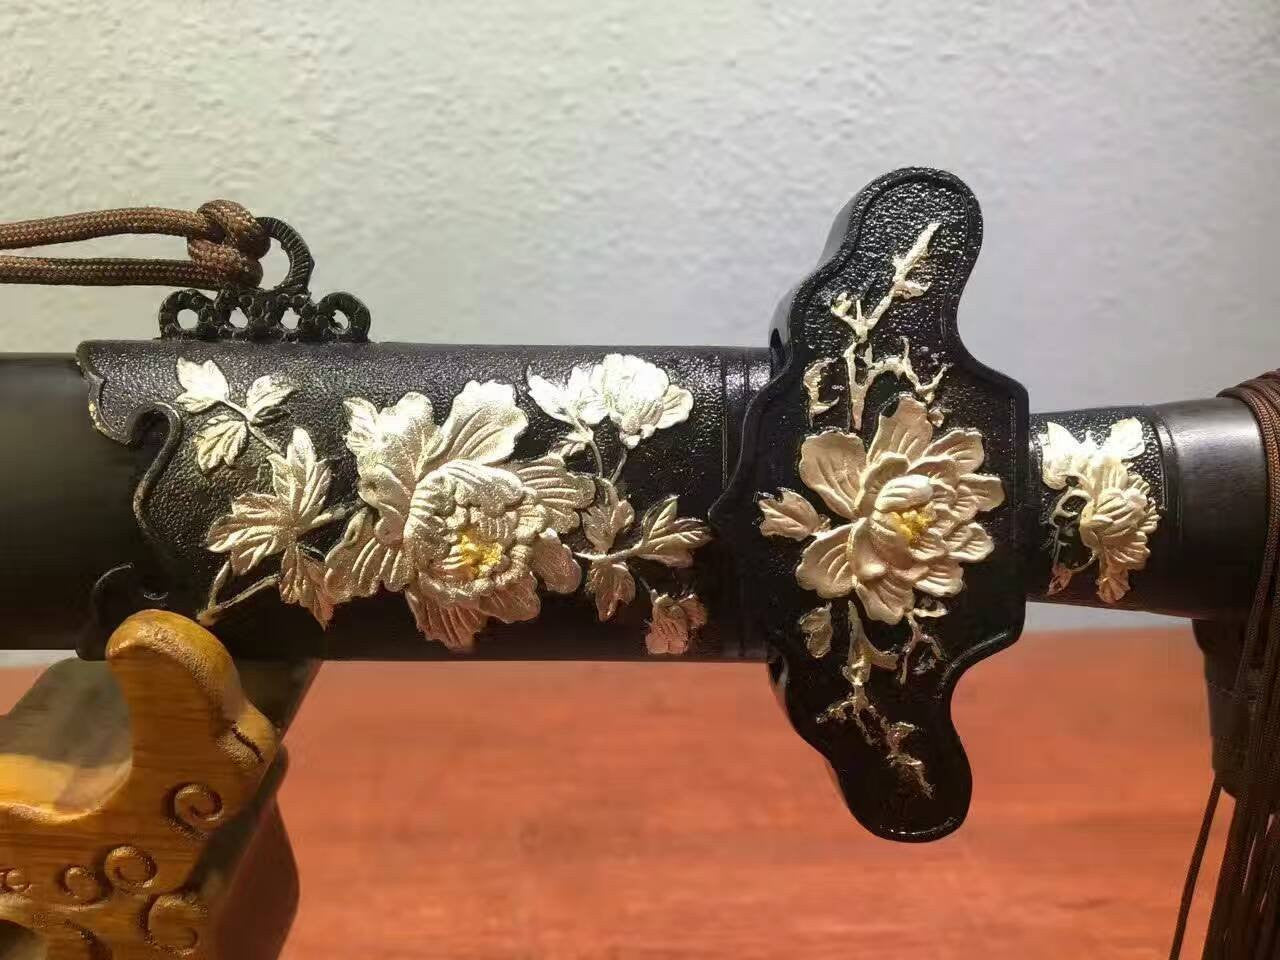 Peony sword-Damascus steel made Blade-Ebony Scabbard-Brass carved accessories - Chinese sword shop